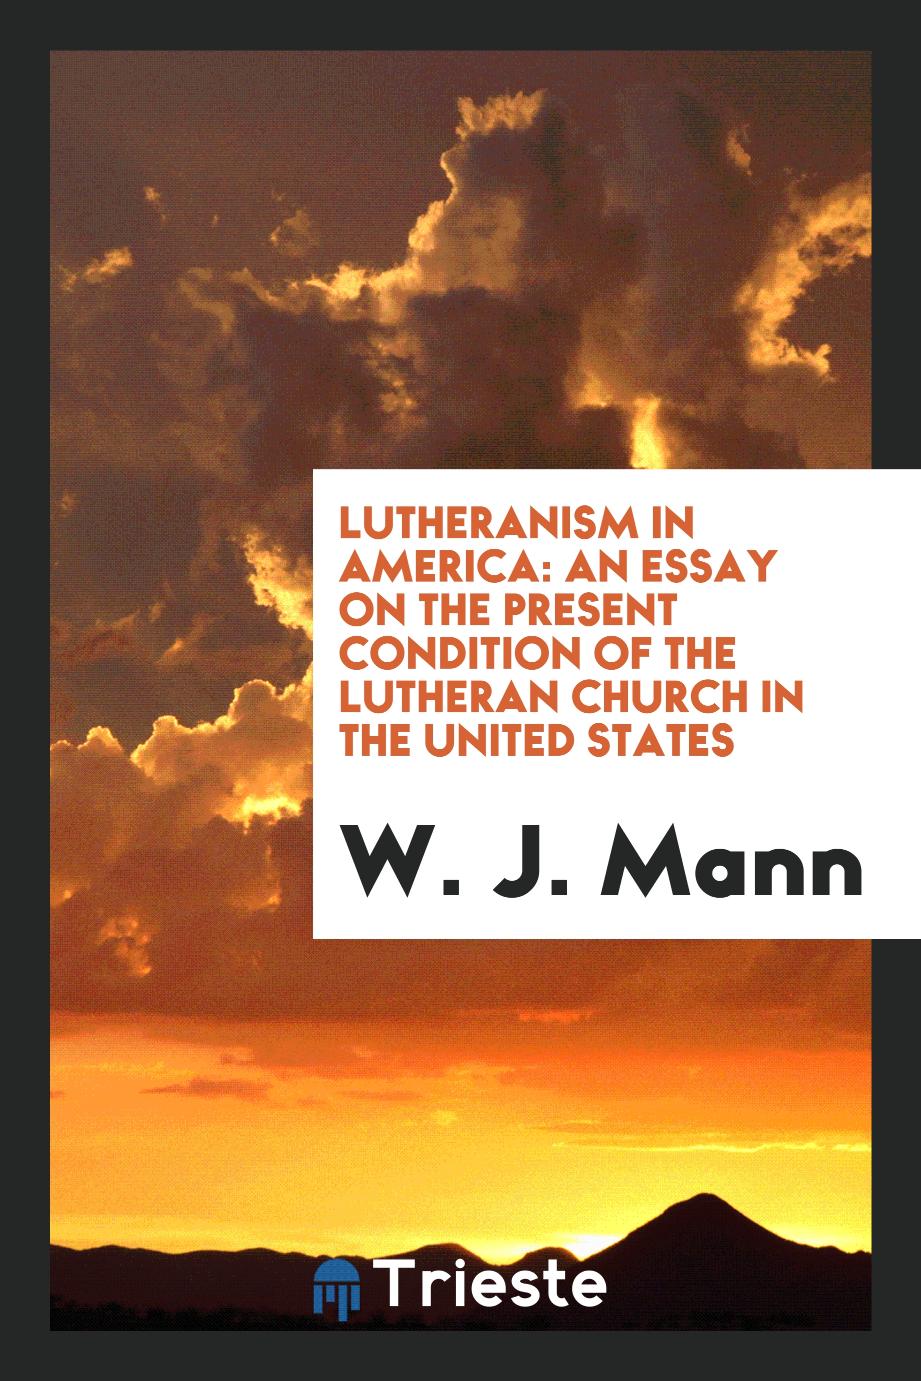 Lutheranism in America: An Essay on the Present Condition of the Lutheran Church in the United States